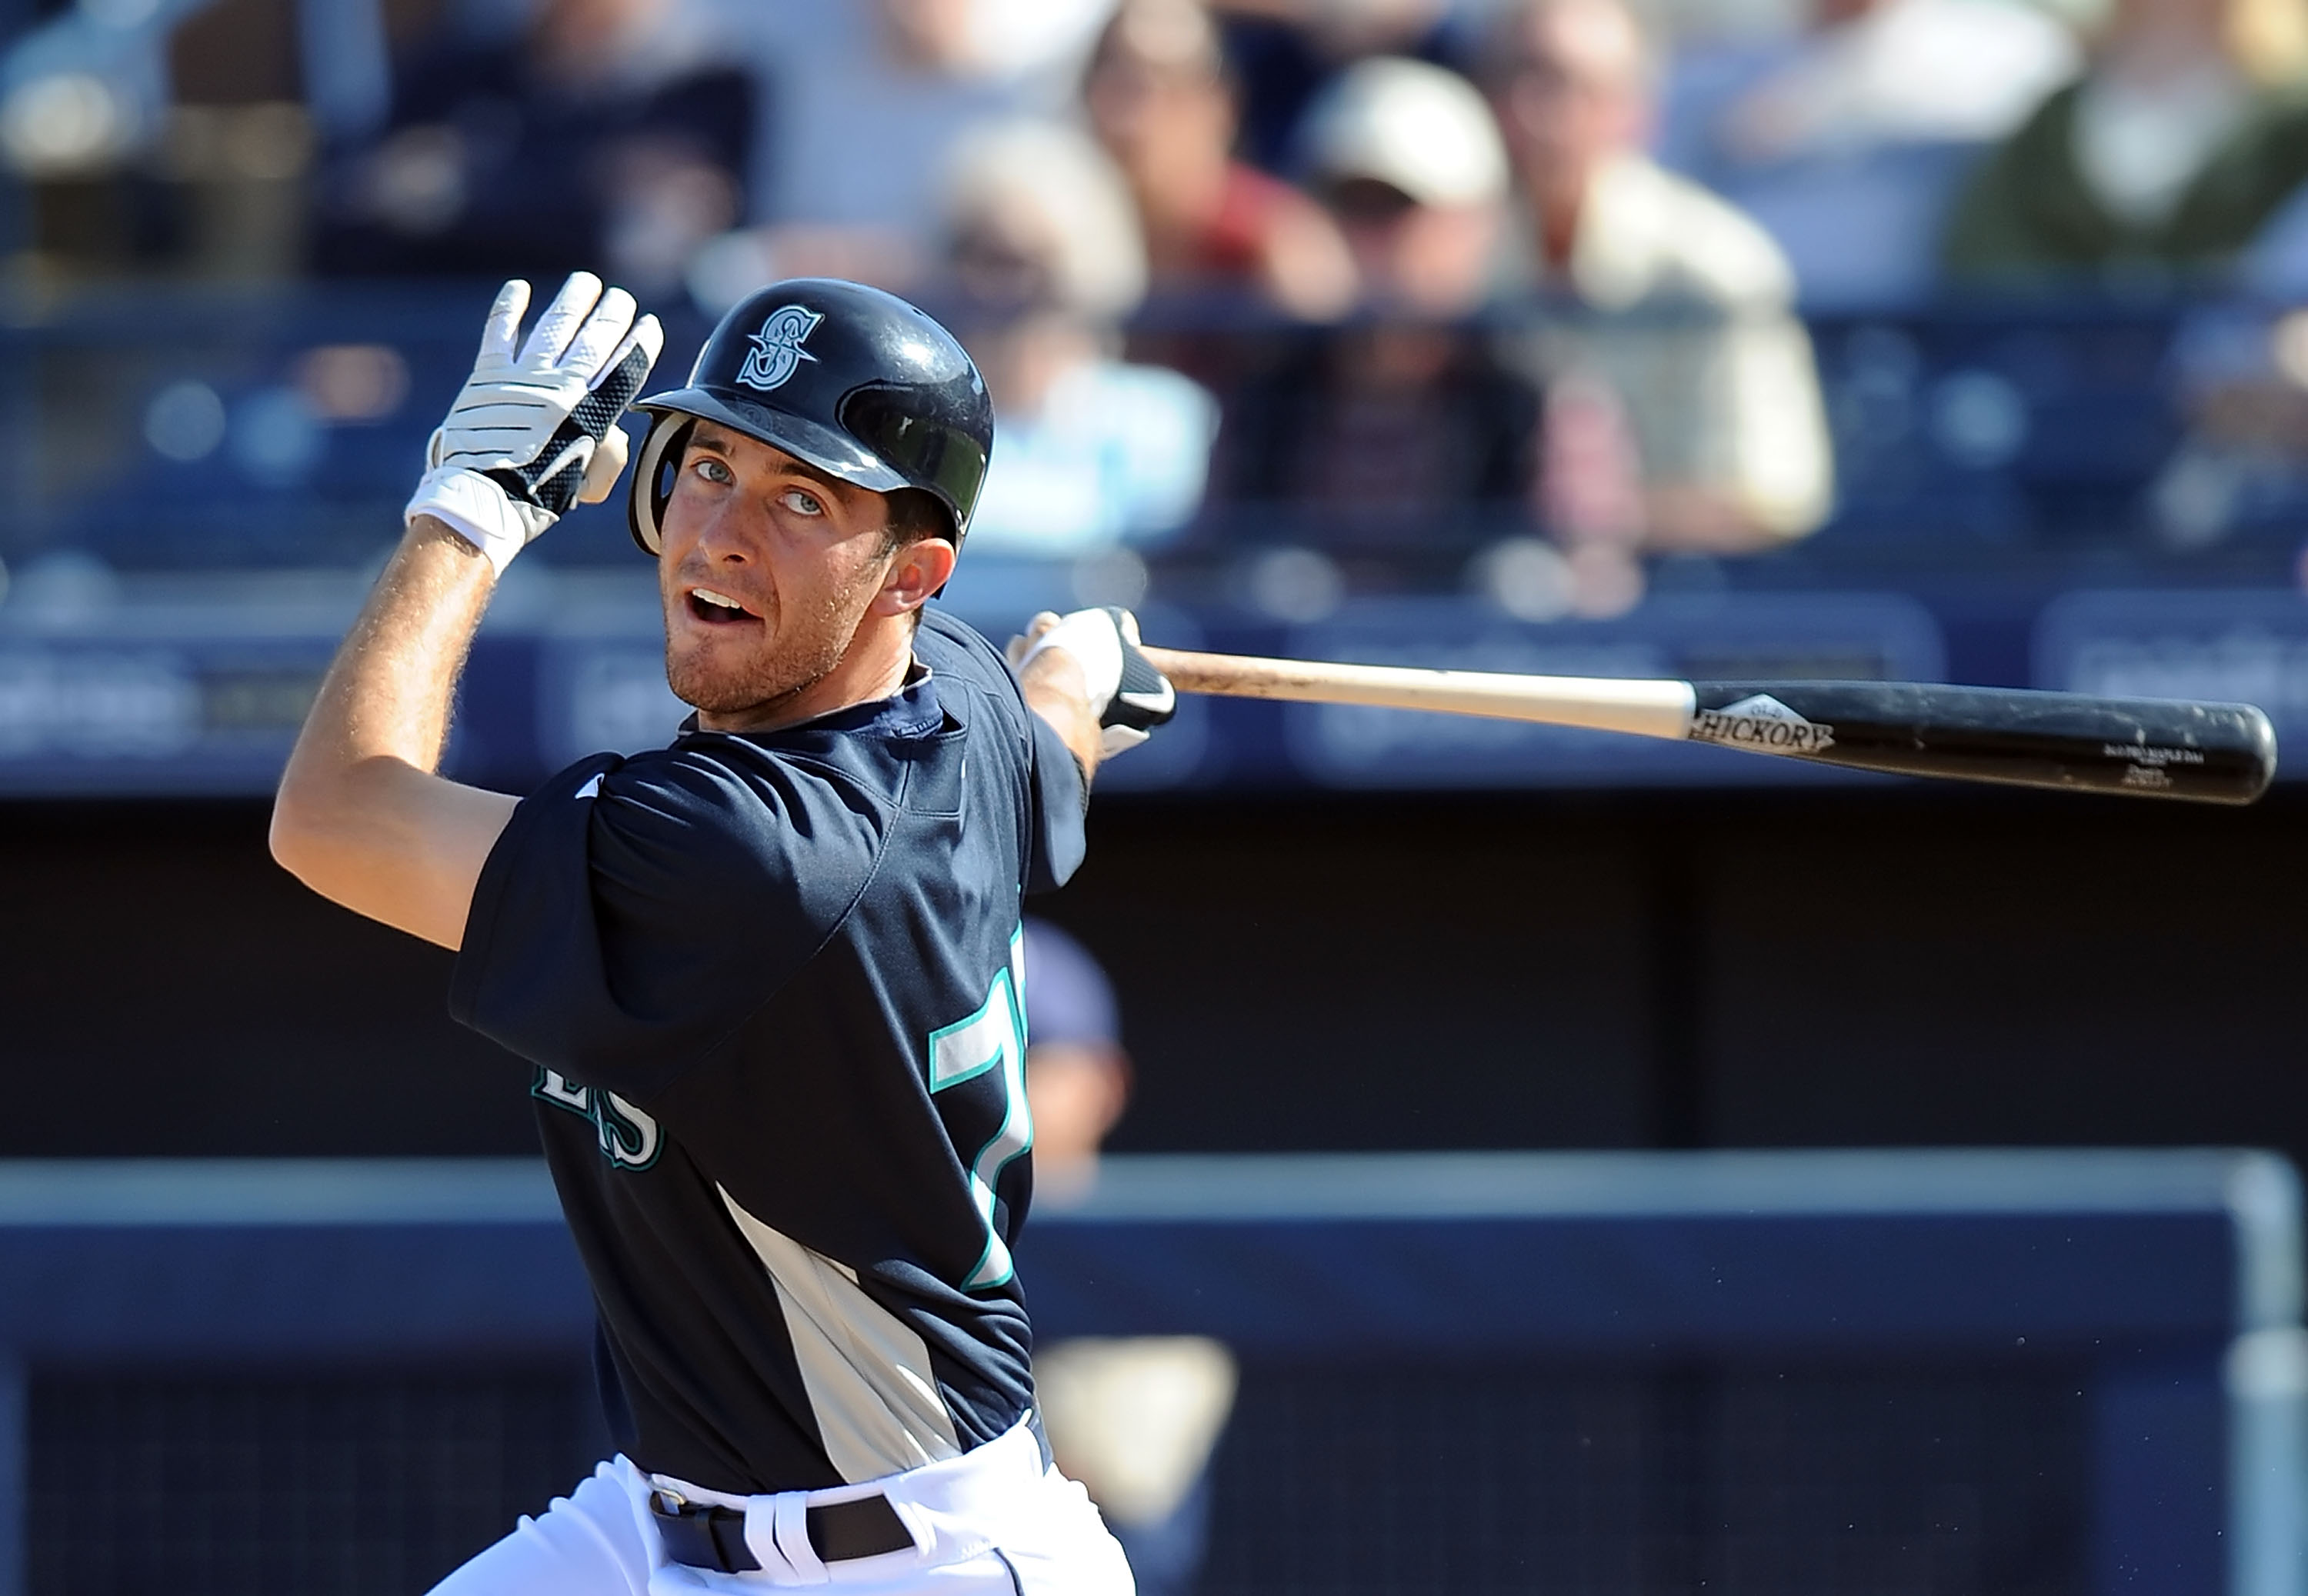 PEORIA, AZ - MARCH 05:  Dustin Ackley #75 of the Seattle Mariners at bat during a Spring Training game against the San Diego Padres on March 5, 2010 in Peoria, Arizona.  (Photo by Lisa Blumenfeld/Getty Images)